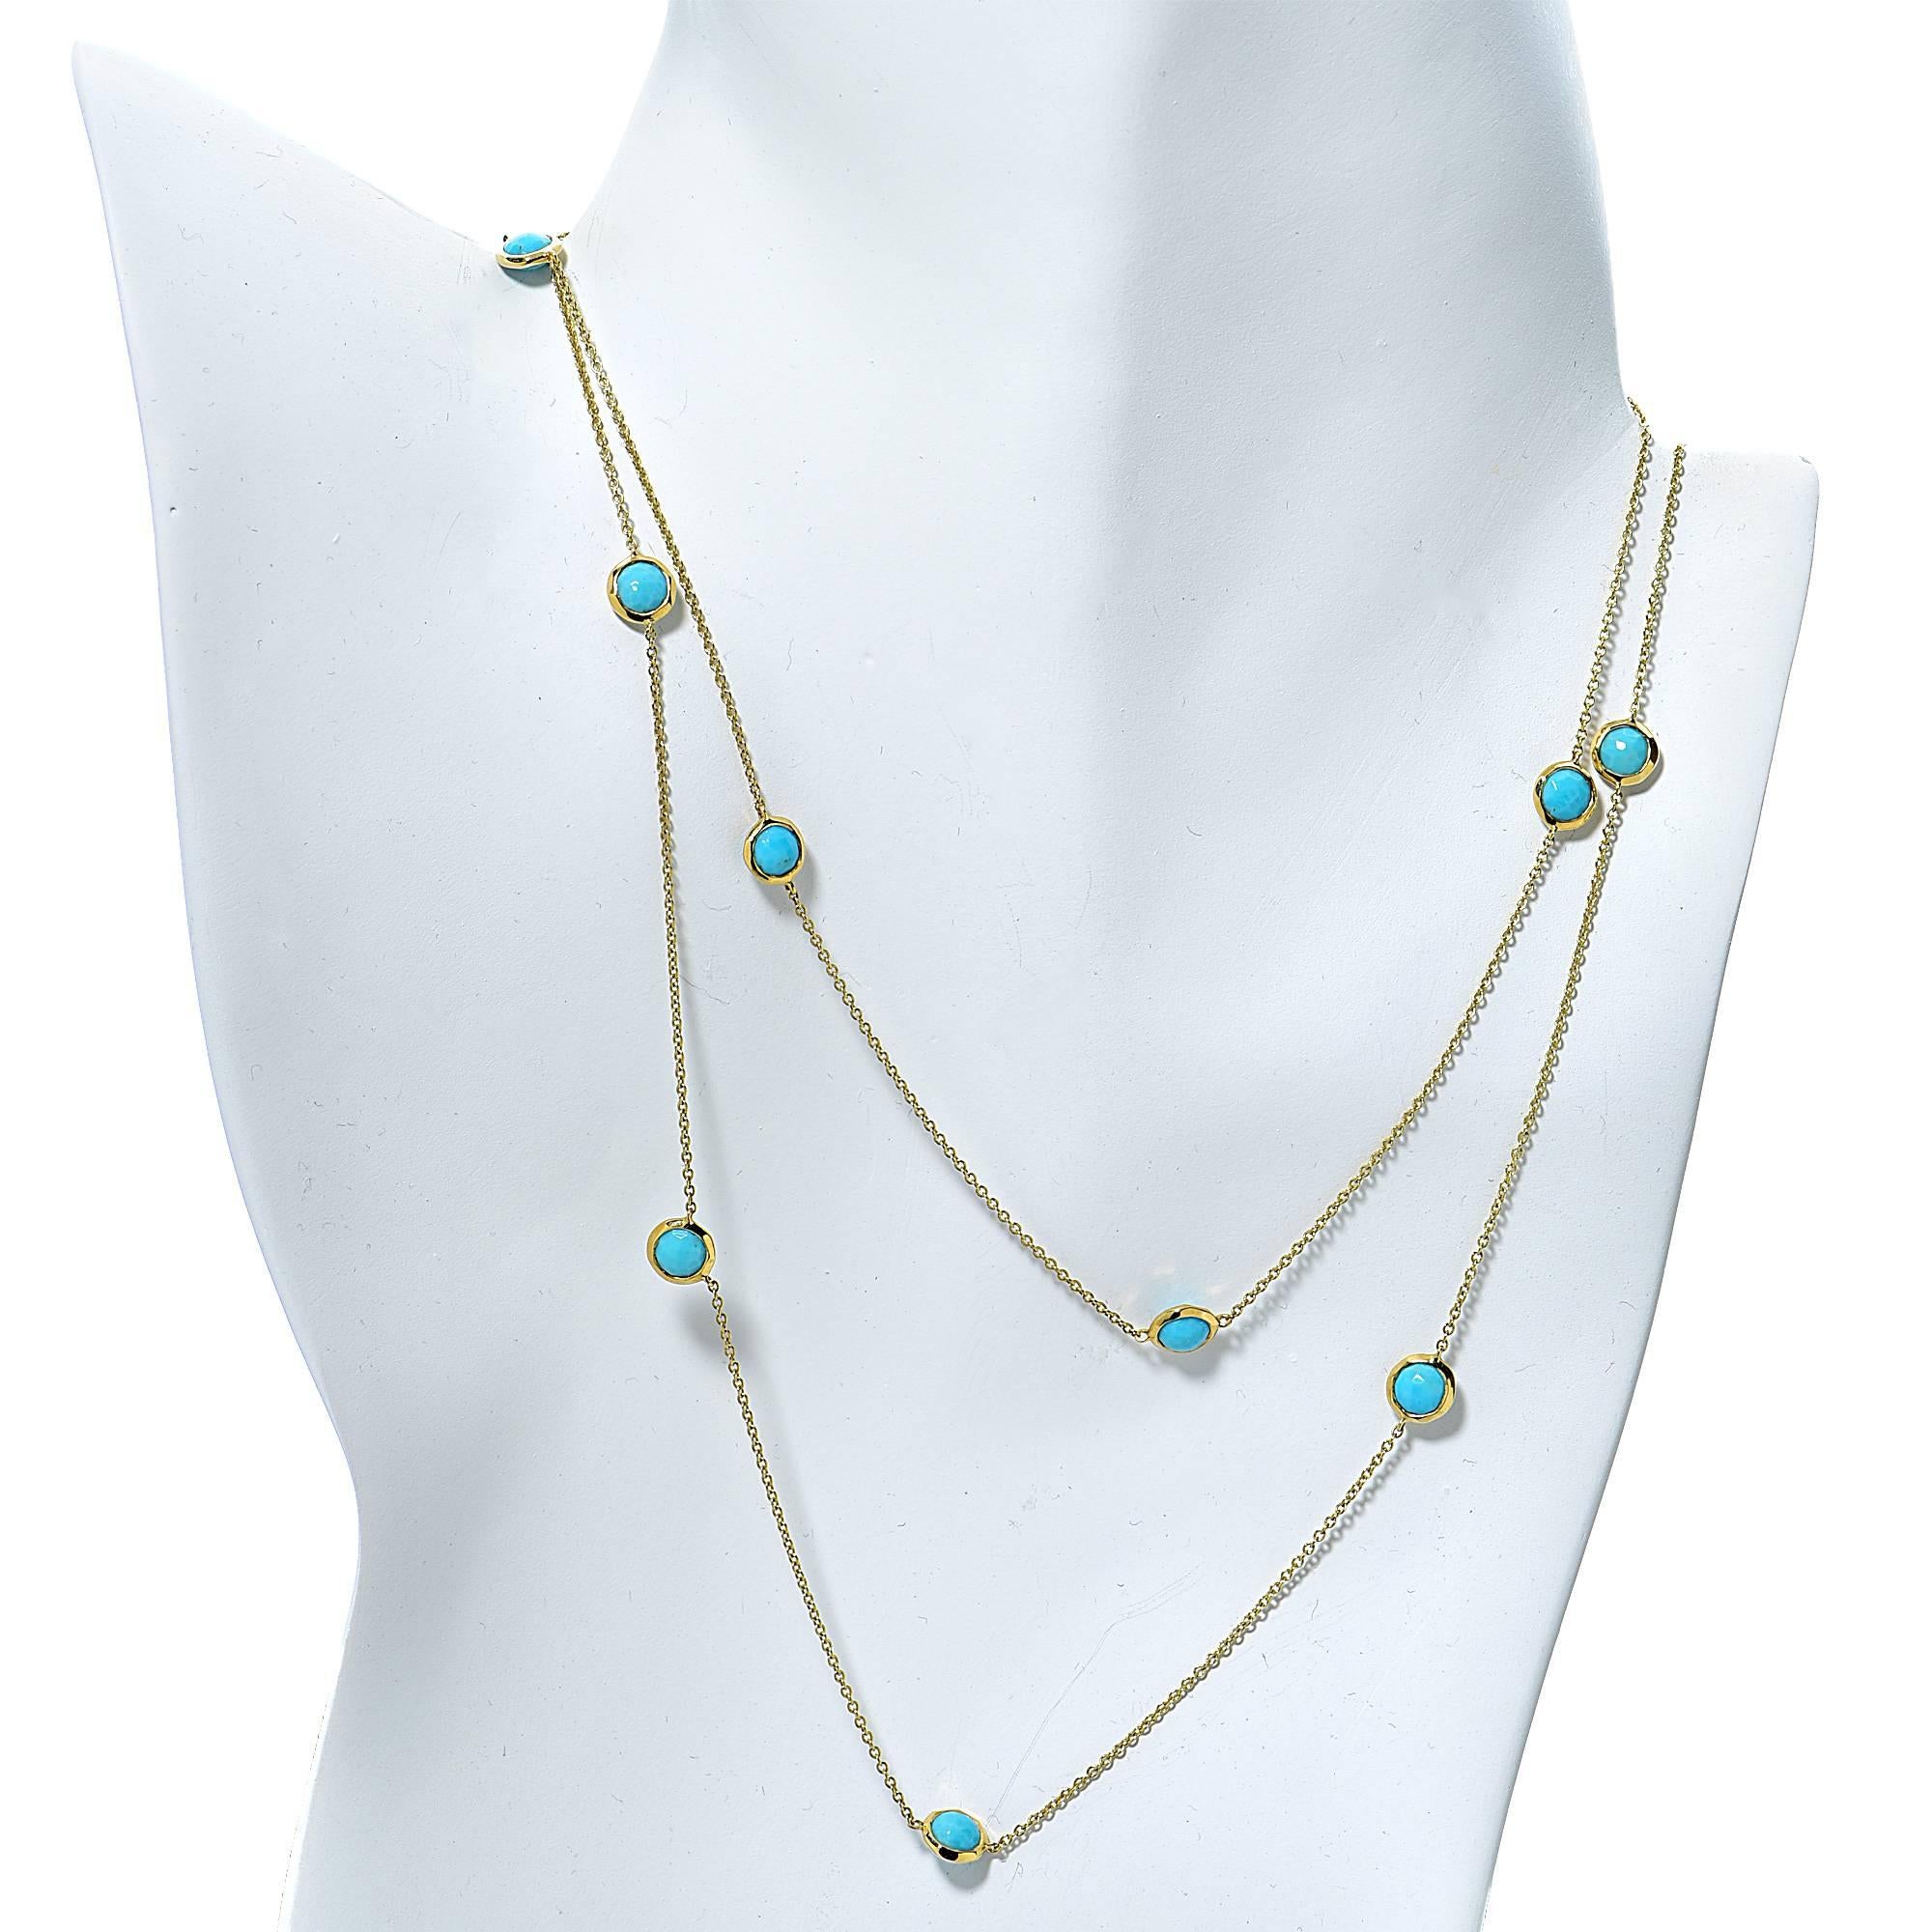 Ippolita 18 Karat Yellow Gold and Turquoise Necklace.

Weight: 9.01 grams

This Necklace is Accompanied by a Retail Appraisal Performed by an Accredited Gemologist.